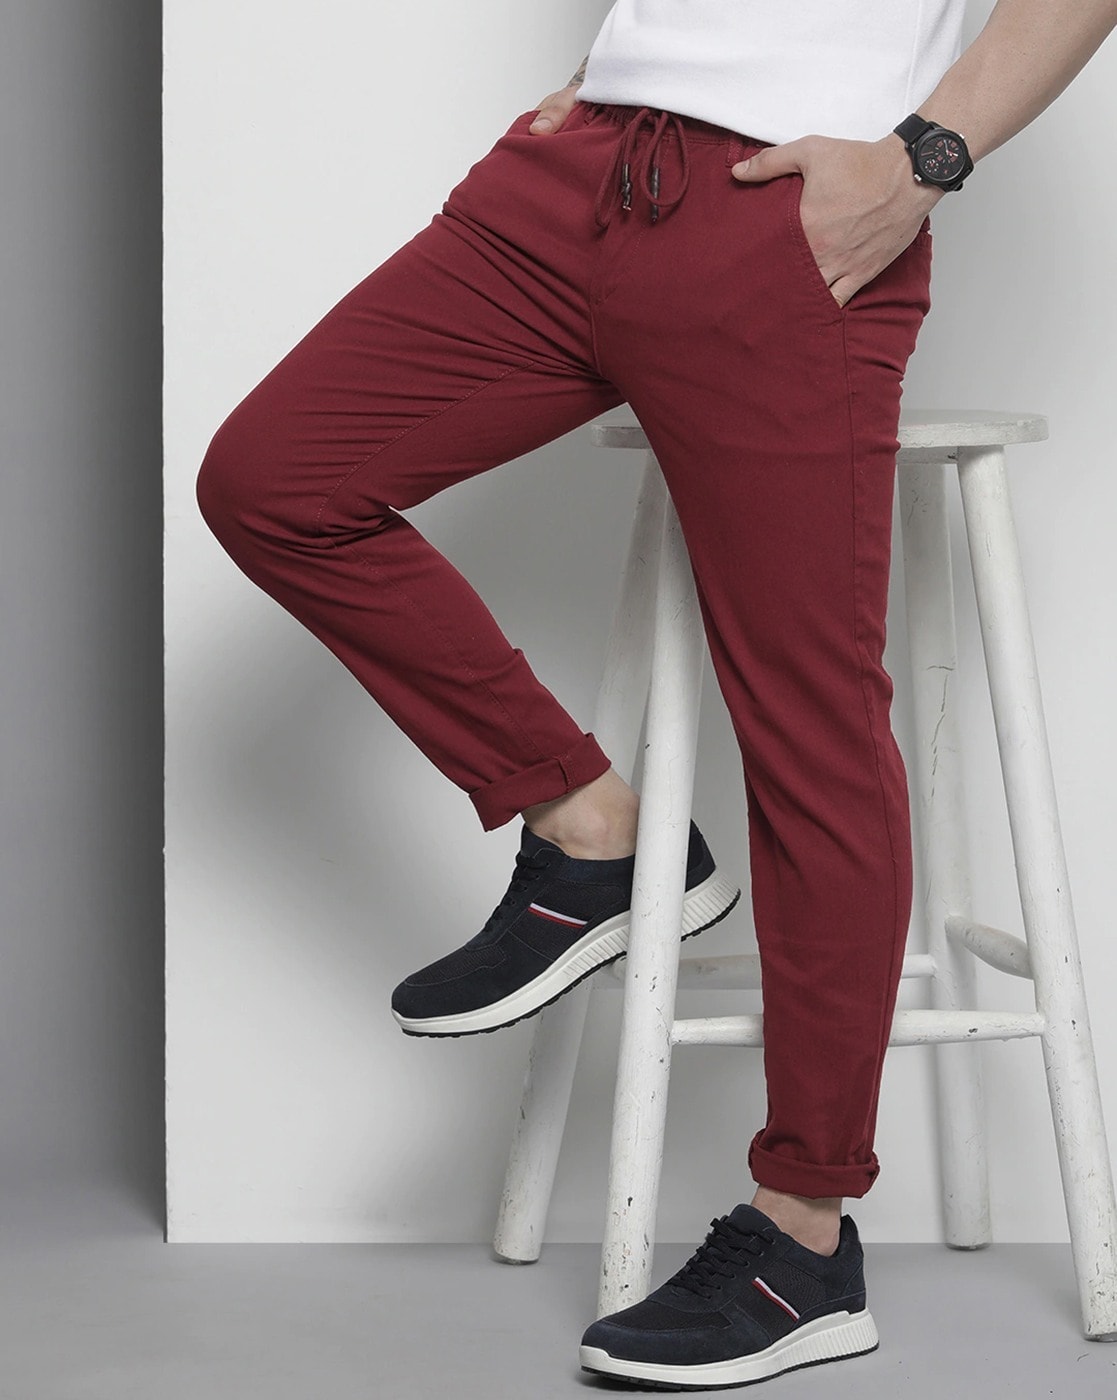 Mens Red Pants Inspiration  Famous Outfits